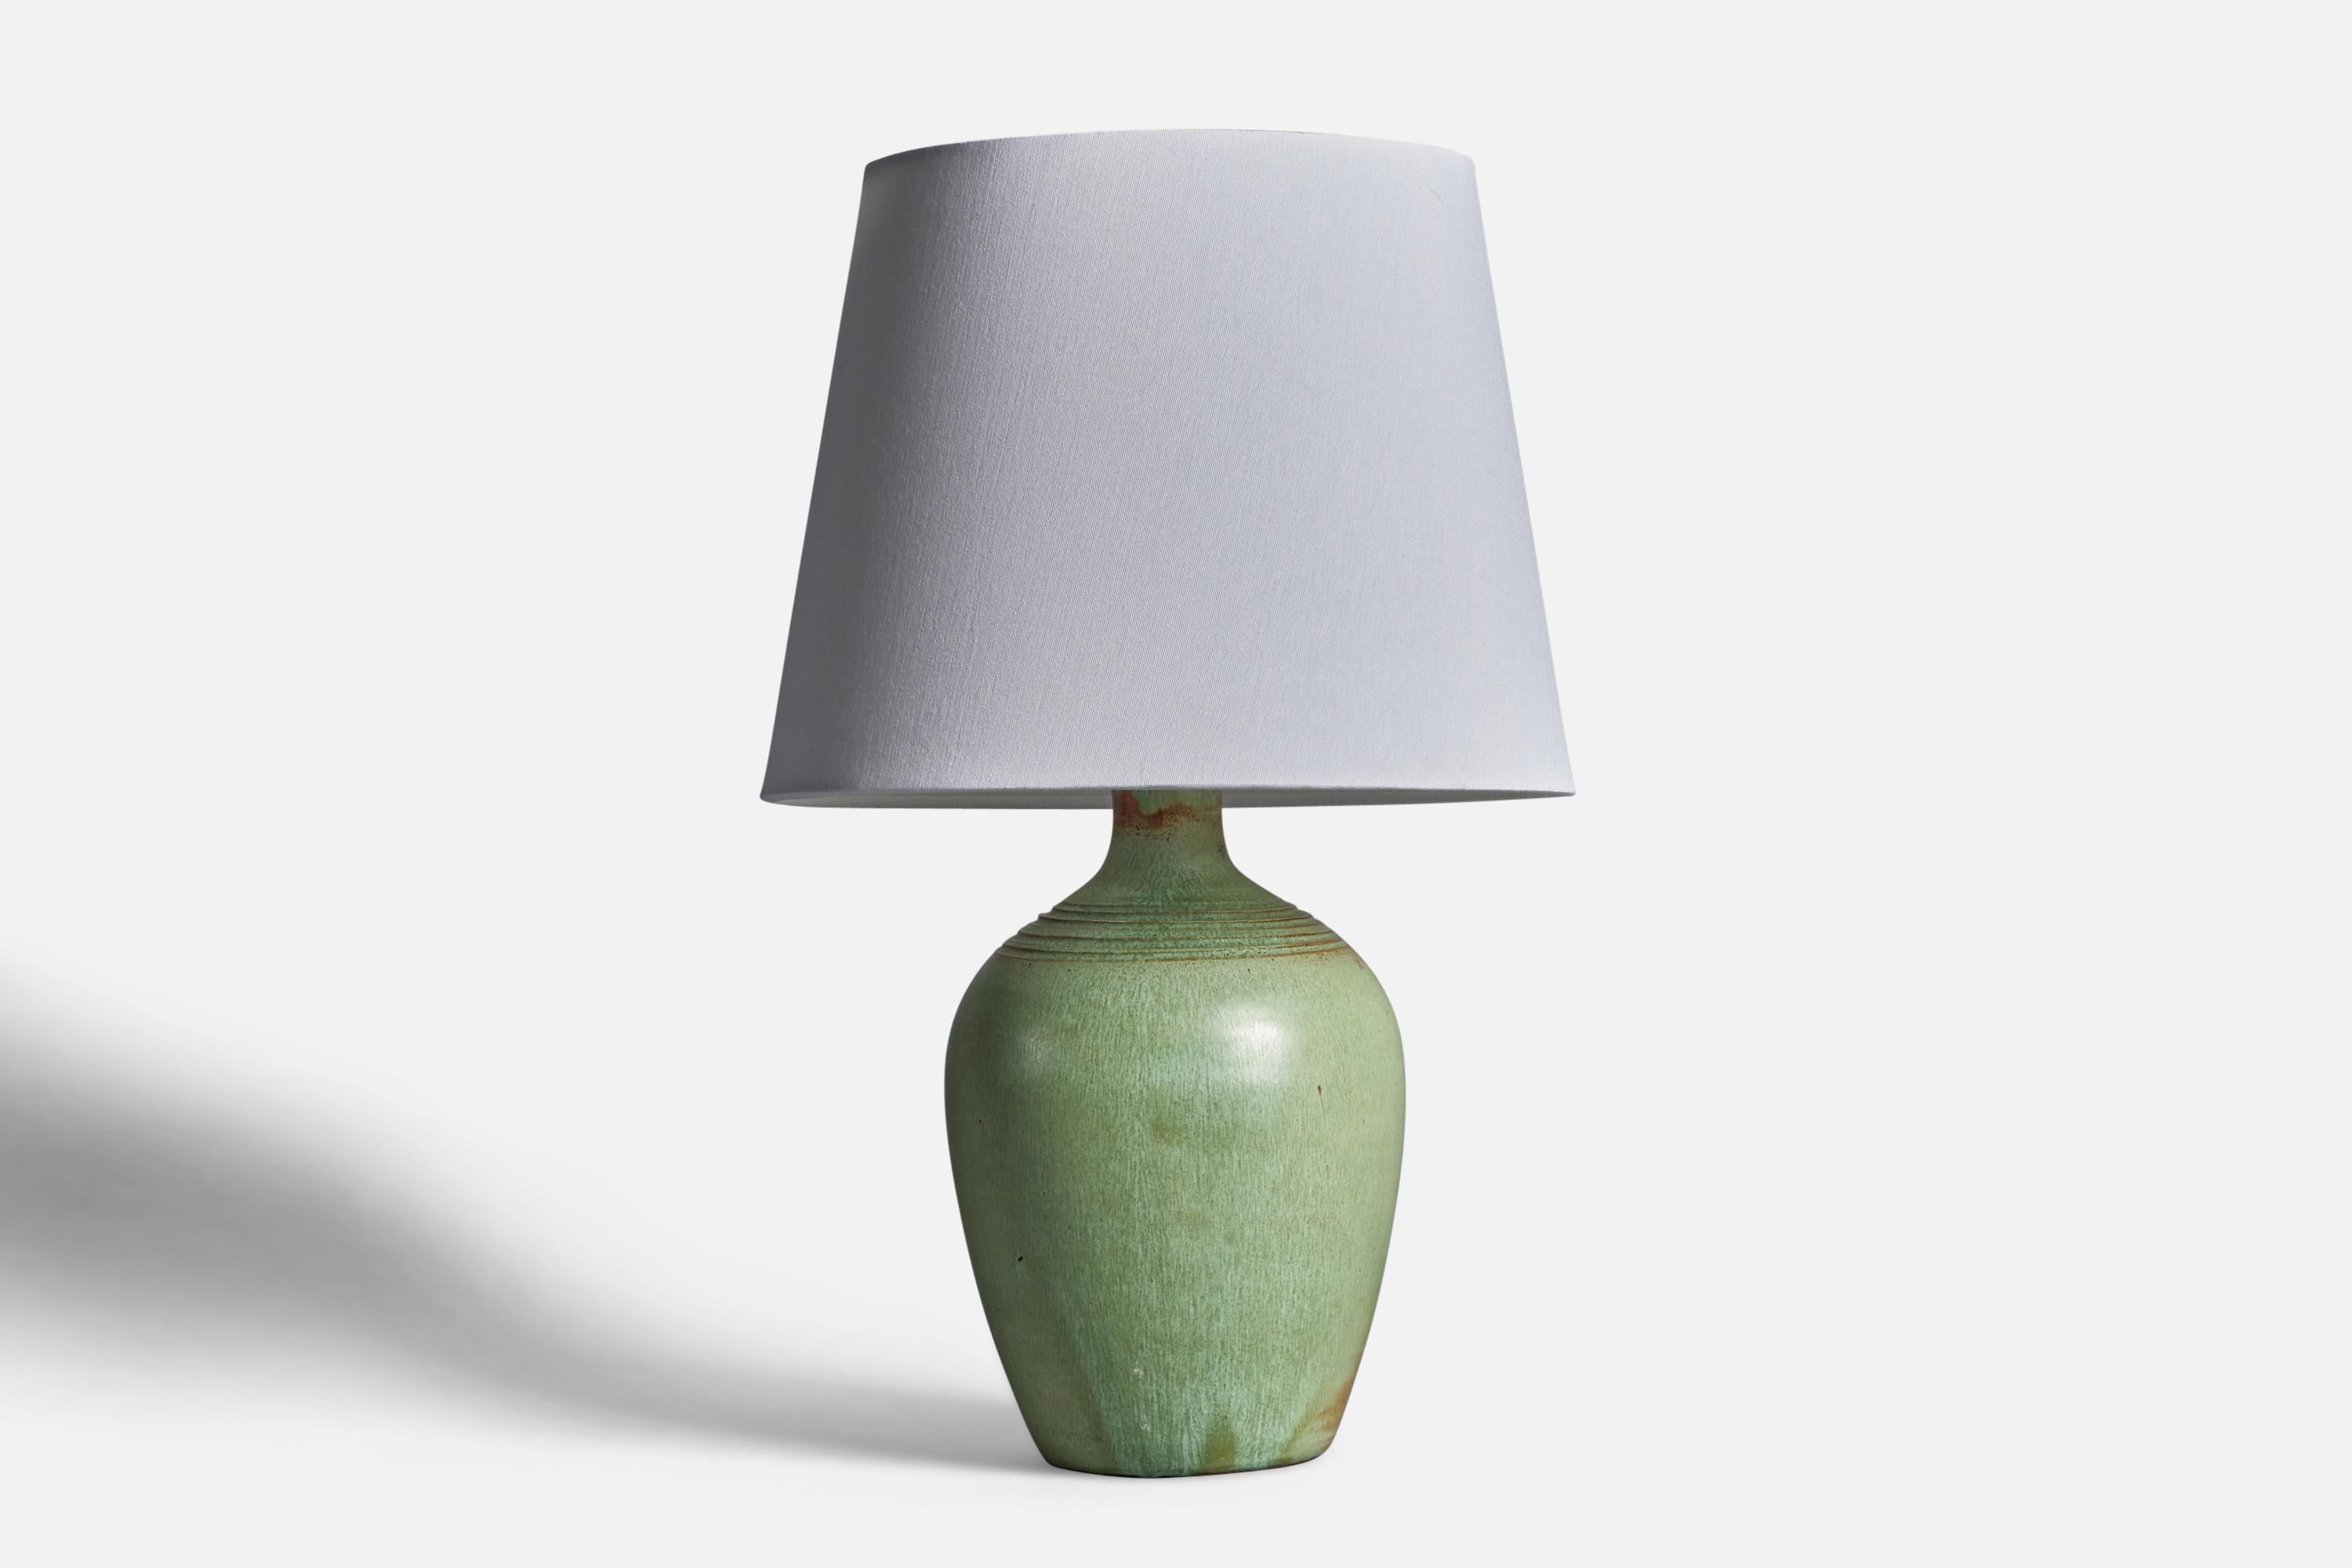 A green-glazed and incised ceramic table lamp designed and produced in North Carolina, USA, 1950s.

Dimensions of Lamp (inches): 12.5” H x 6” Diameter
Dimensions of Shade (inches): 7.5” Top Diameter x 10” Bottom Diameter x 8” H
Dimensions of Lamp